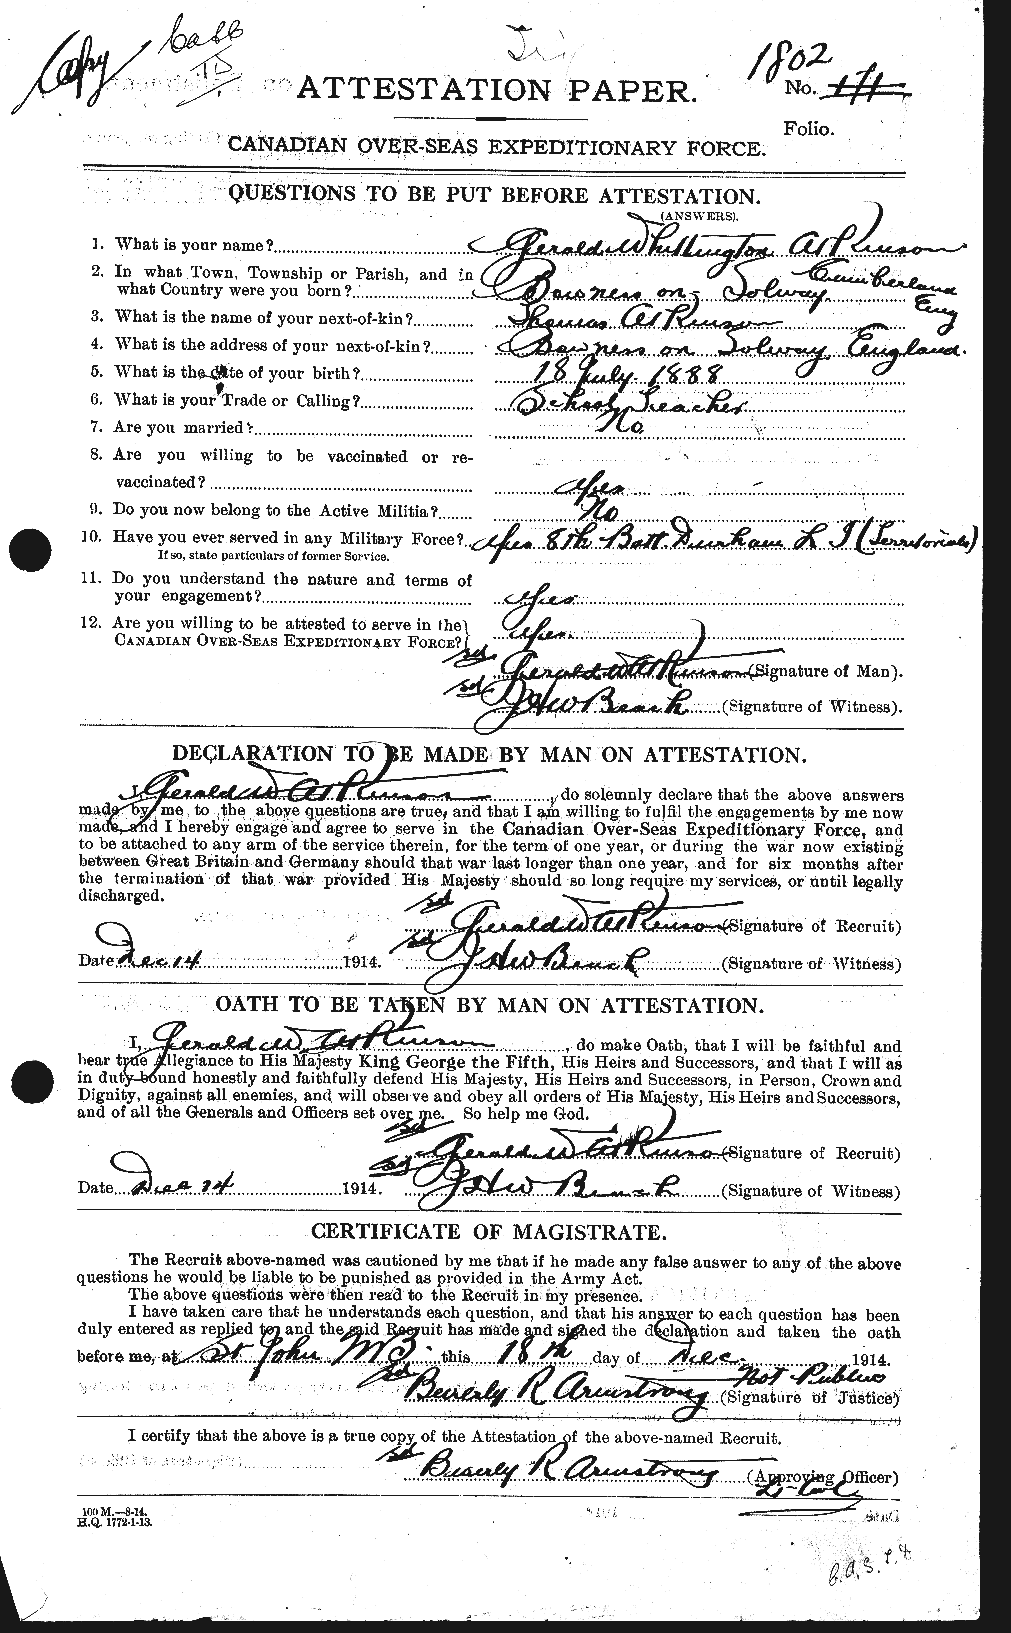 Personnel Records of the First World War - CEF 217403a